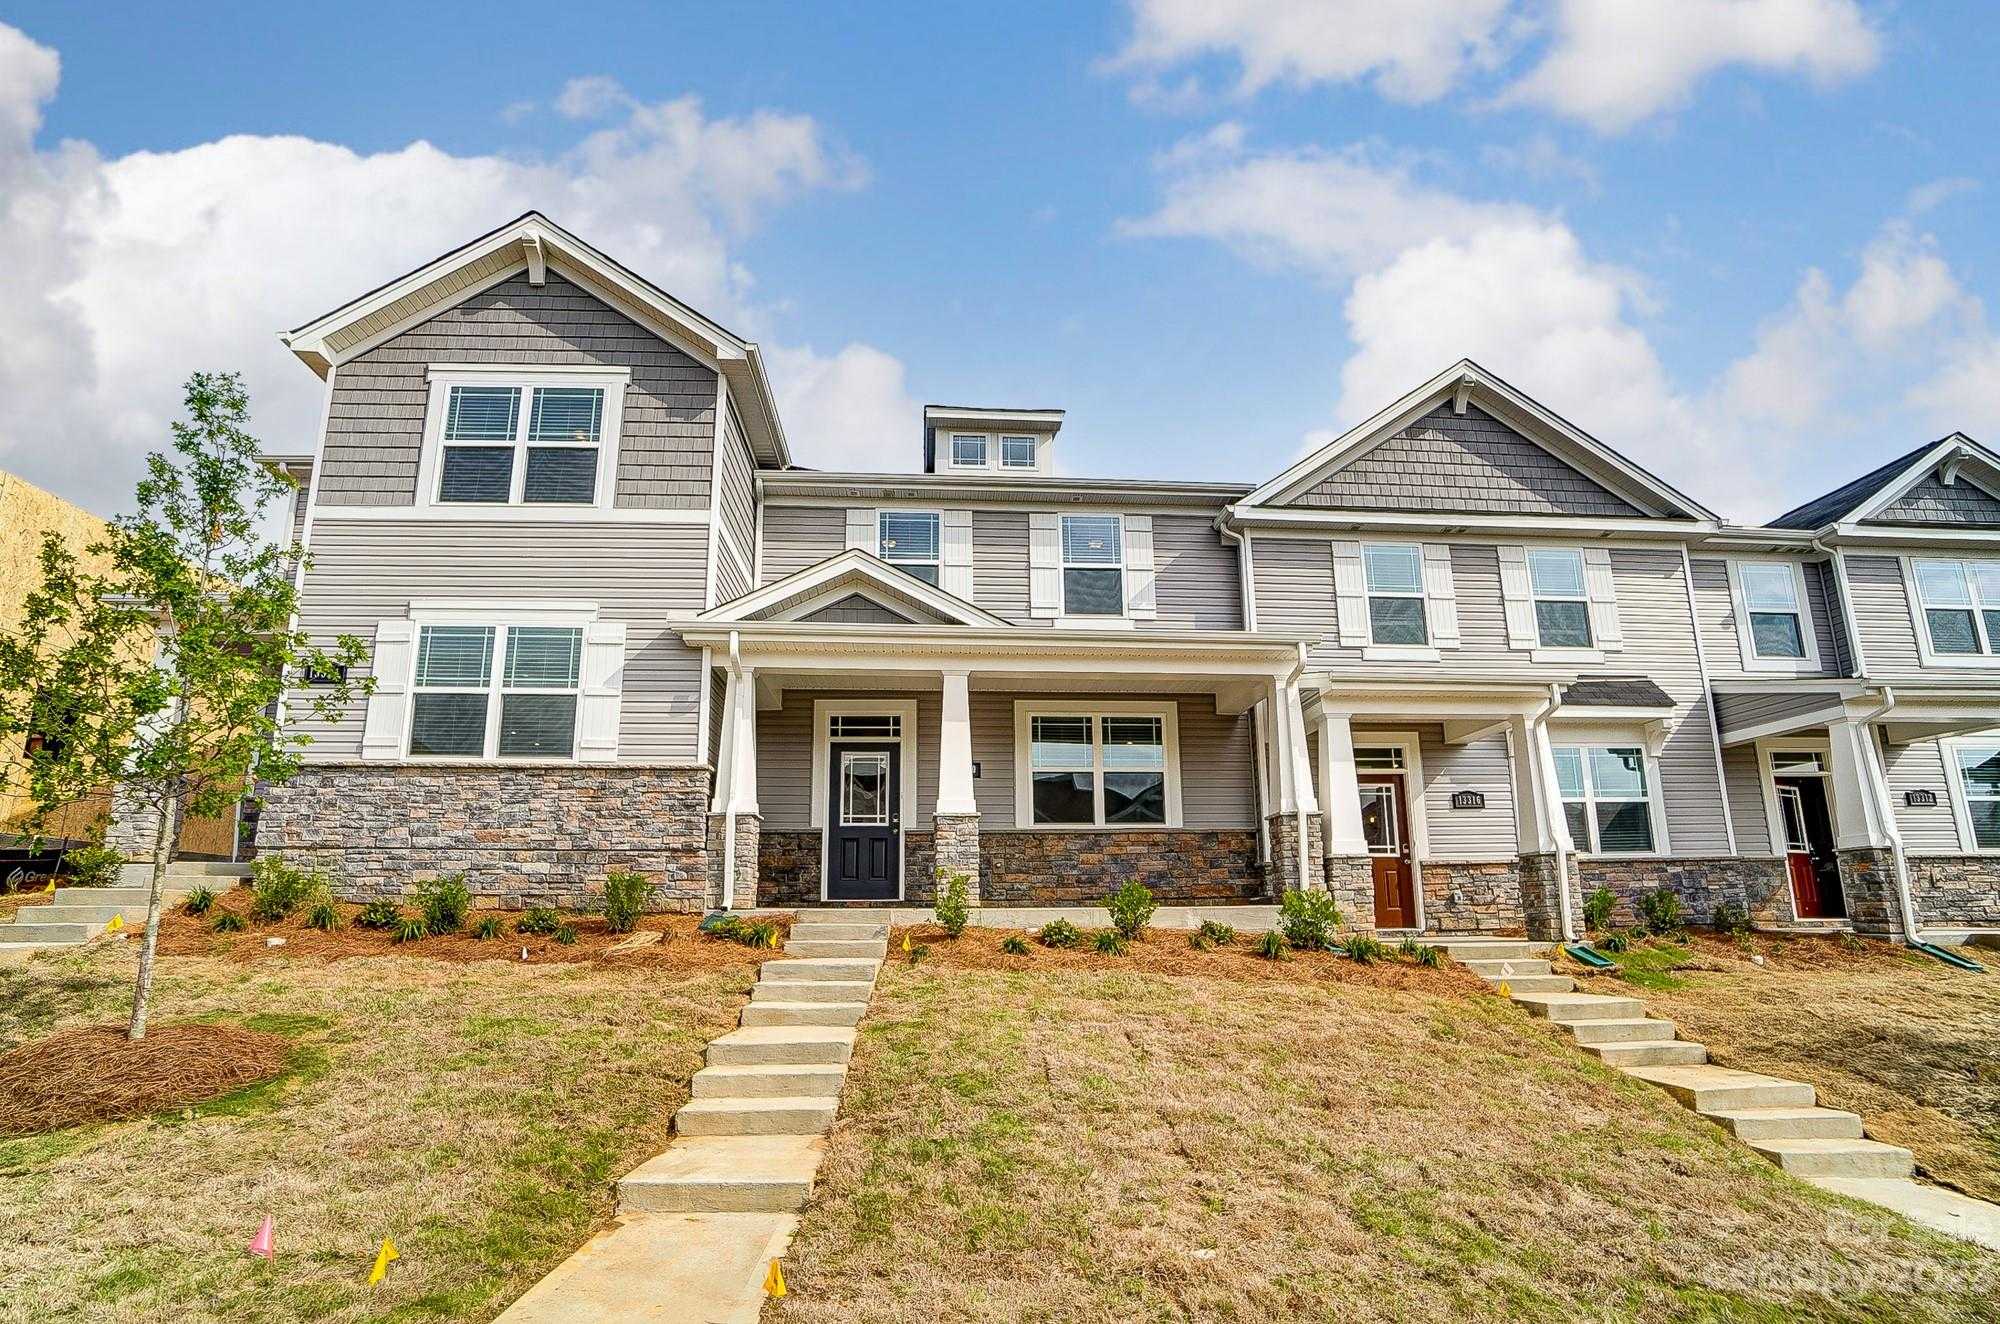 View Charlotte, NC 28278 townhome